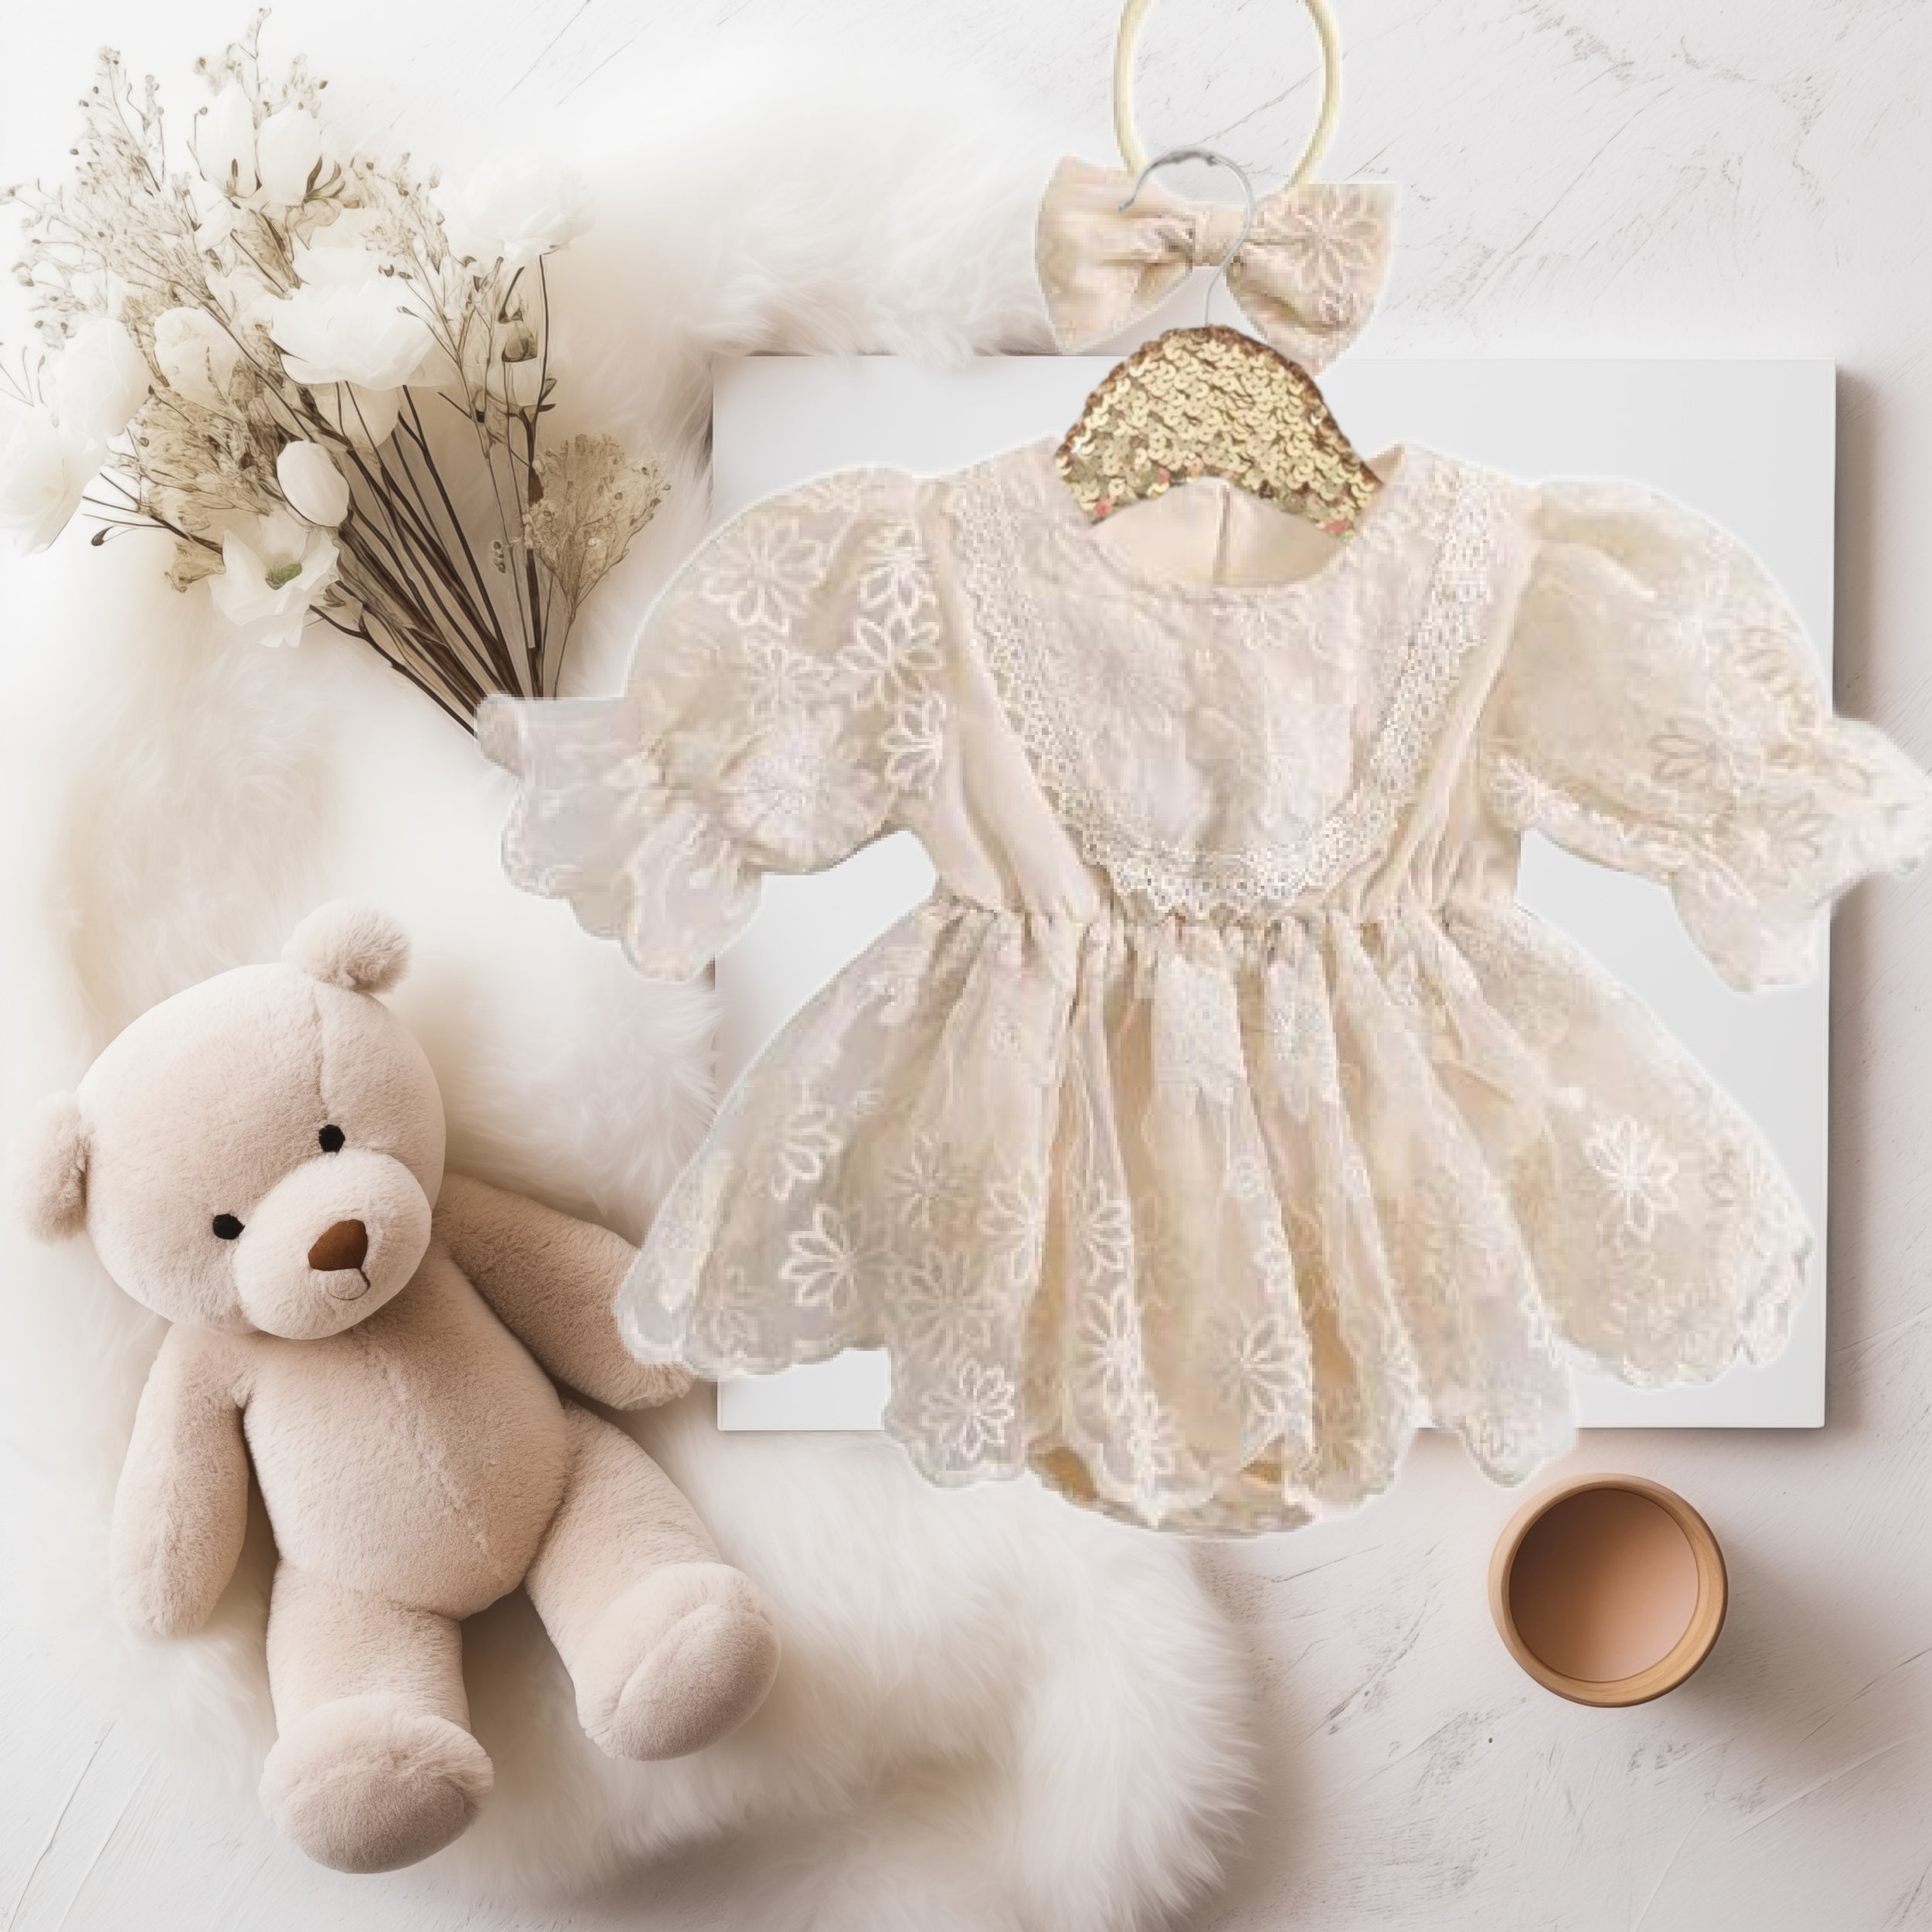 Baby Girls Ivory/White Lace Vintage Romper